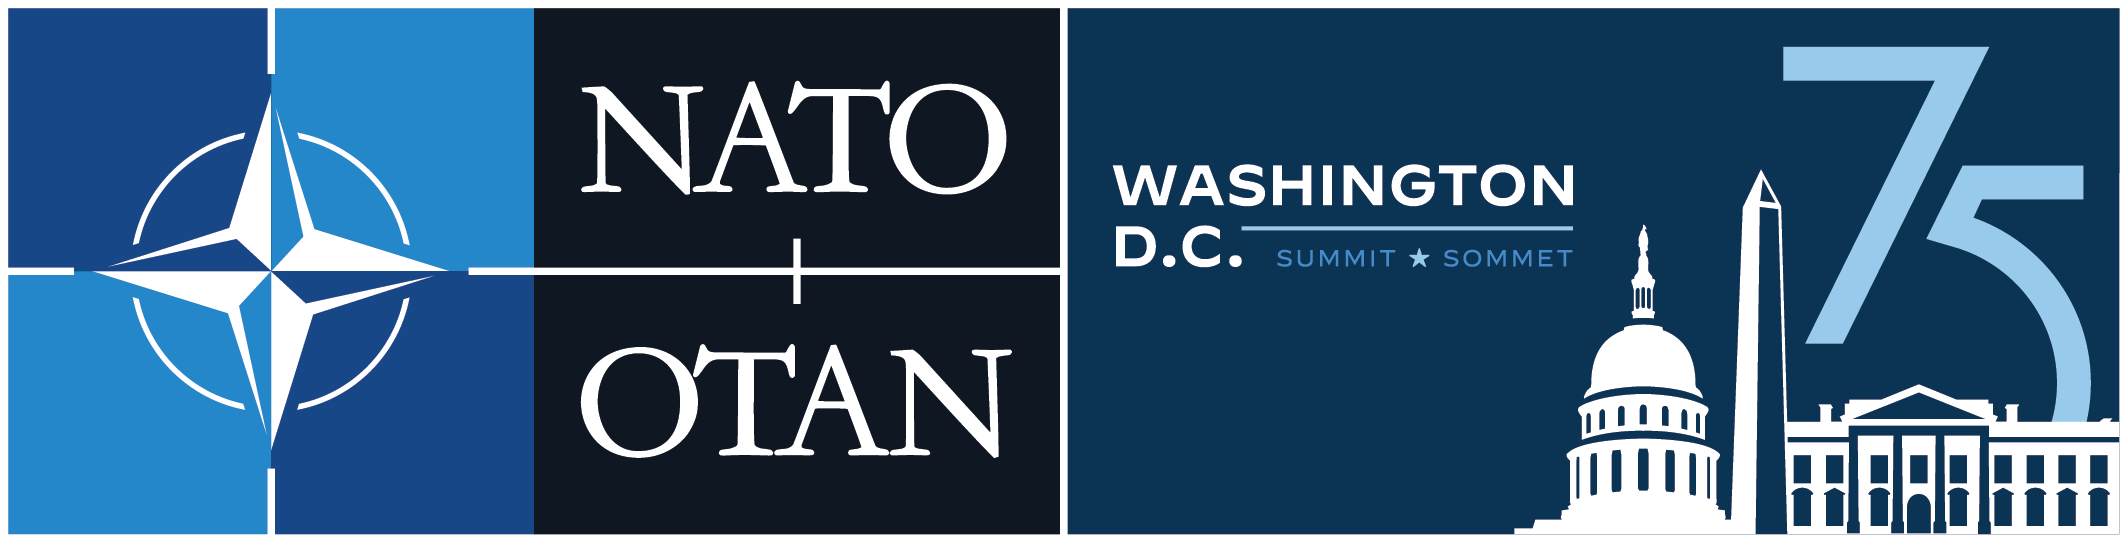 Official logo for the NATO 2024 Summit in Washington D.C., featuring the NATO symbol in blue, the acronyms 'NATO' and 'OTAN' in white, and iconic silhouettes of the Capitol Building, Washington Monument, and White House, with '75' prominently displayed to denote the anniversary.